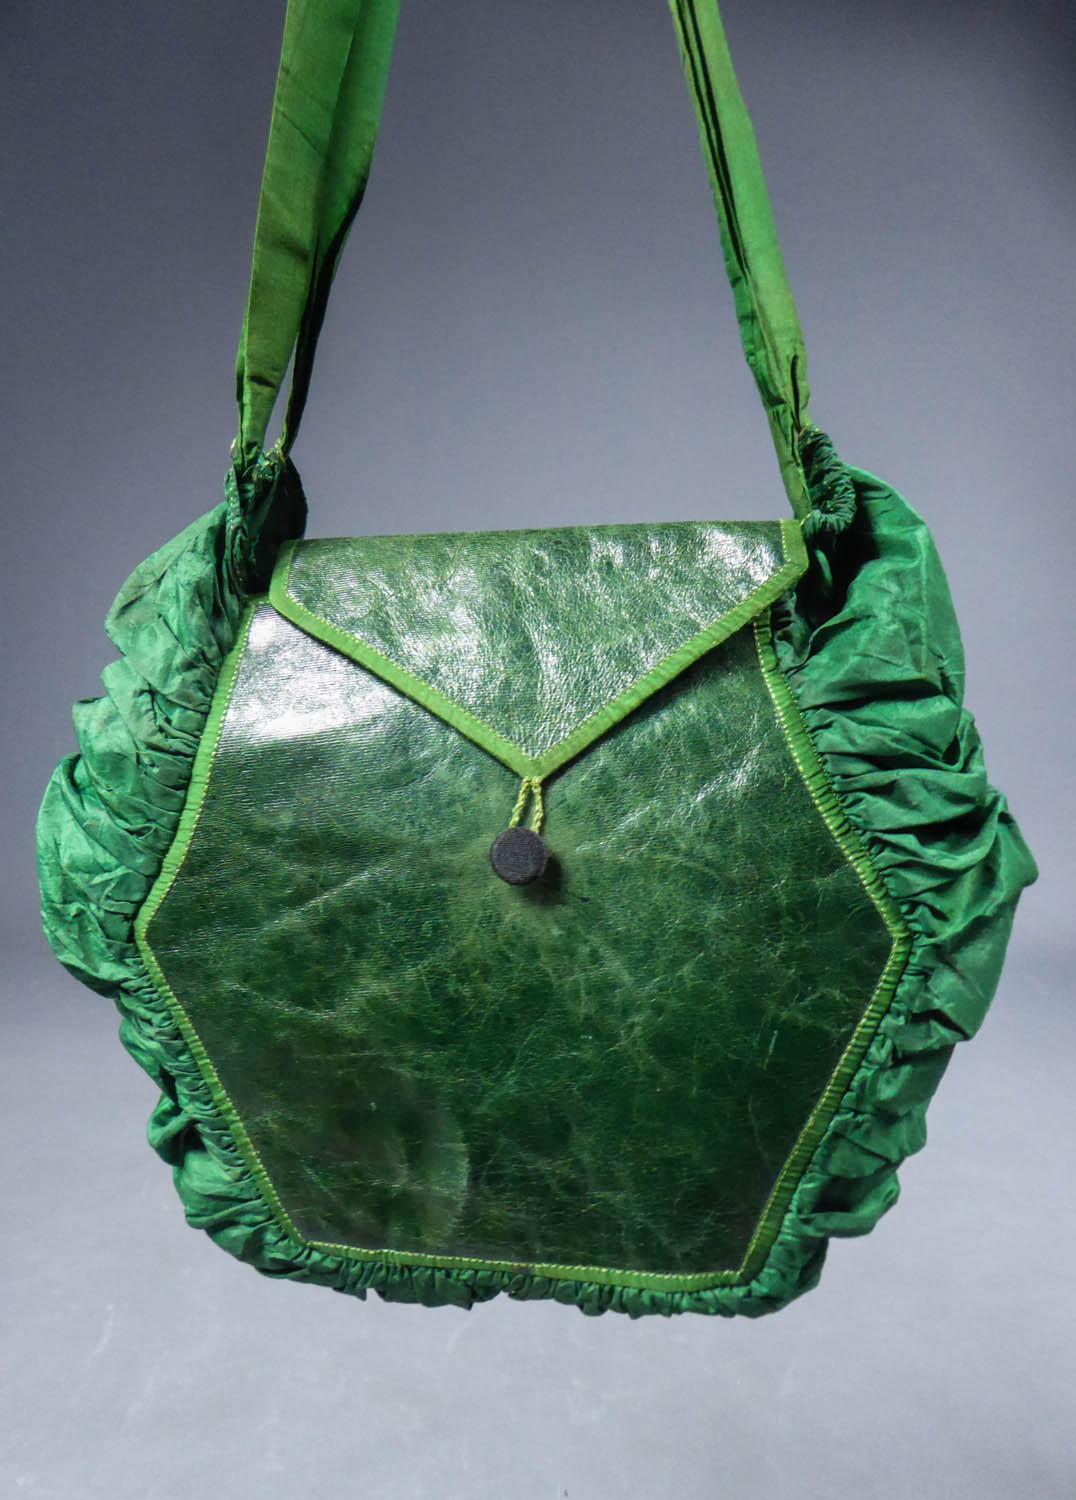 Circa 1810/1830
Europe

Elegant purse or reticule in green taffeta and leather lined with Indienne dating from the early 19th century. Balloon shape with wide pleated gusset in emerald taffeta and patinated and polish leather patches with piping in